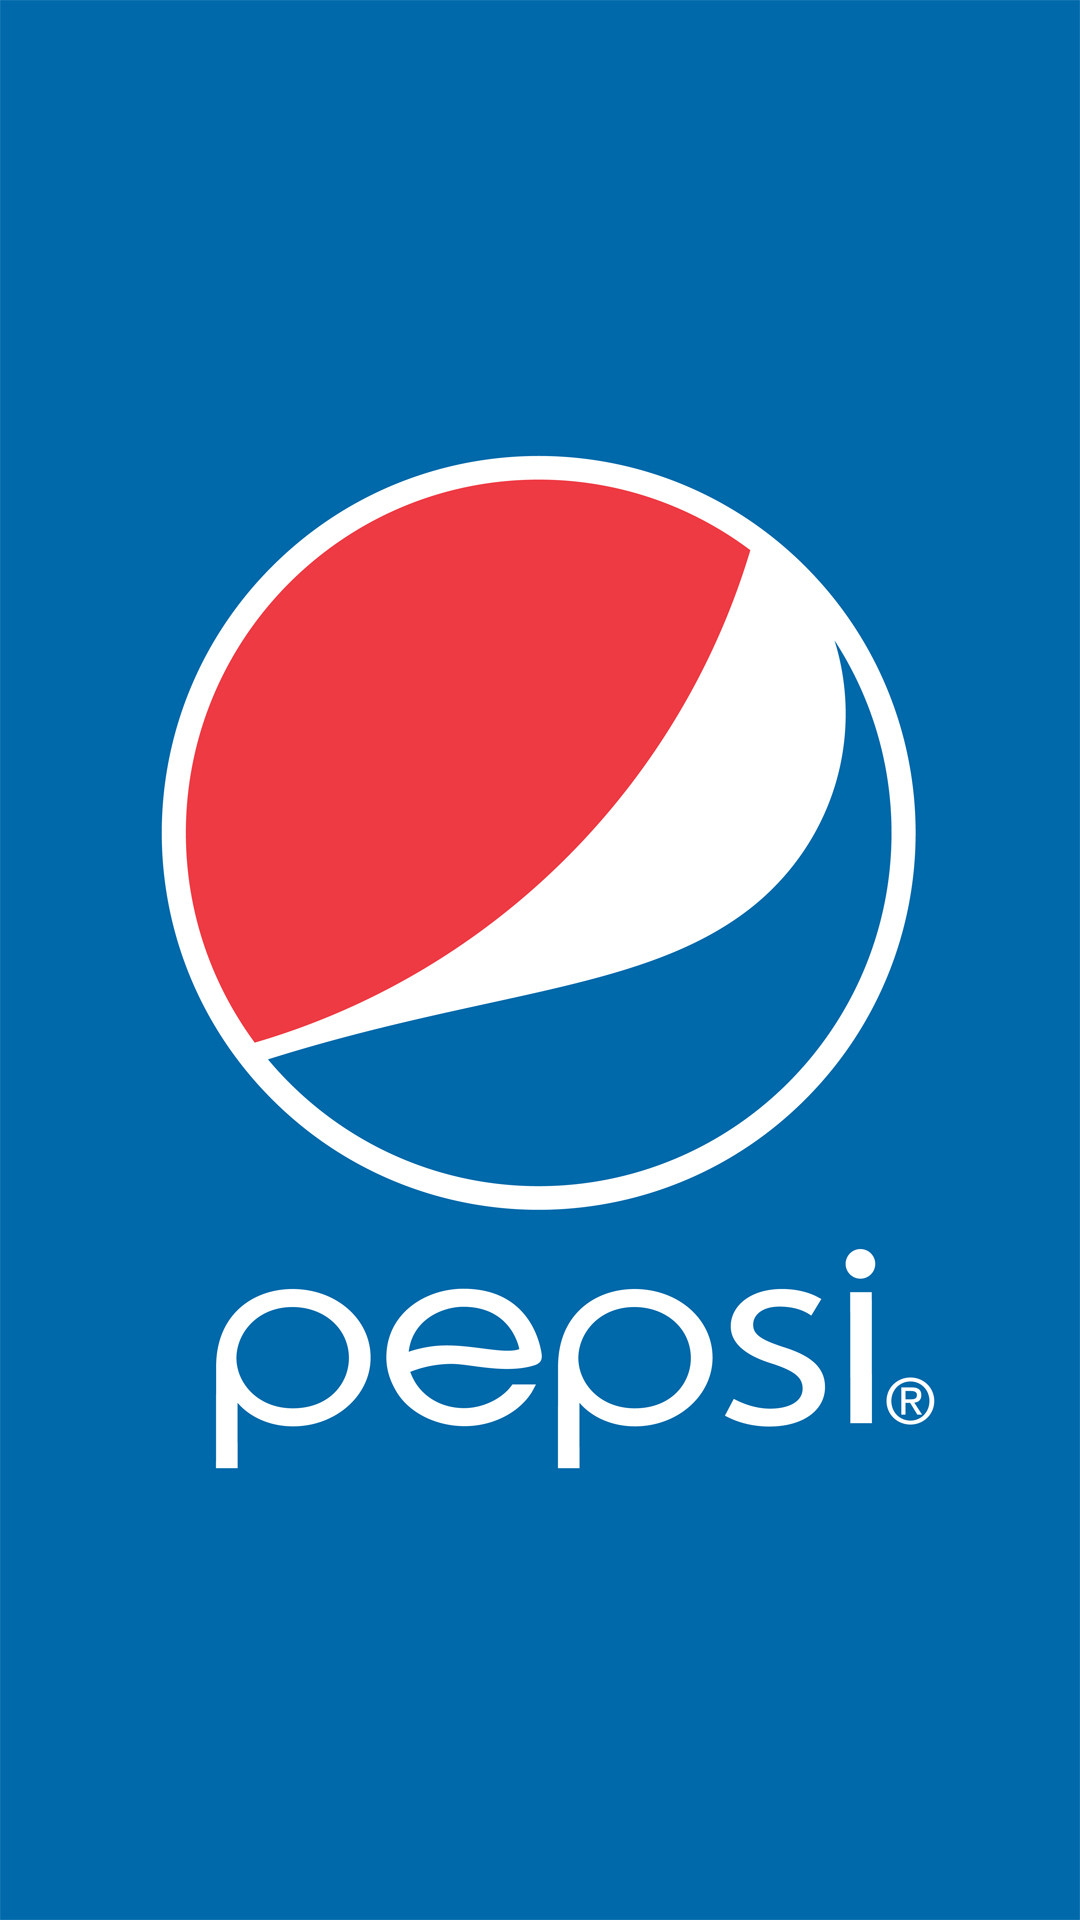 1080x1920 Pepsi logo htc one wallpaper - Best htc one wallpapers, free and easy .